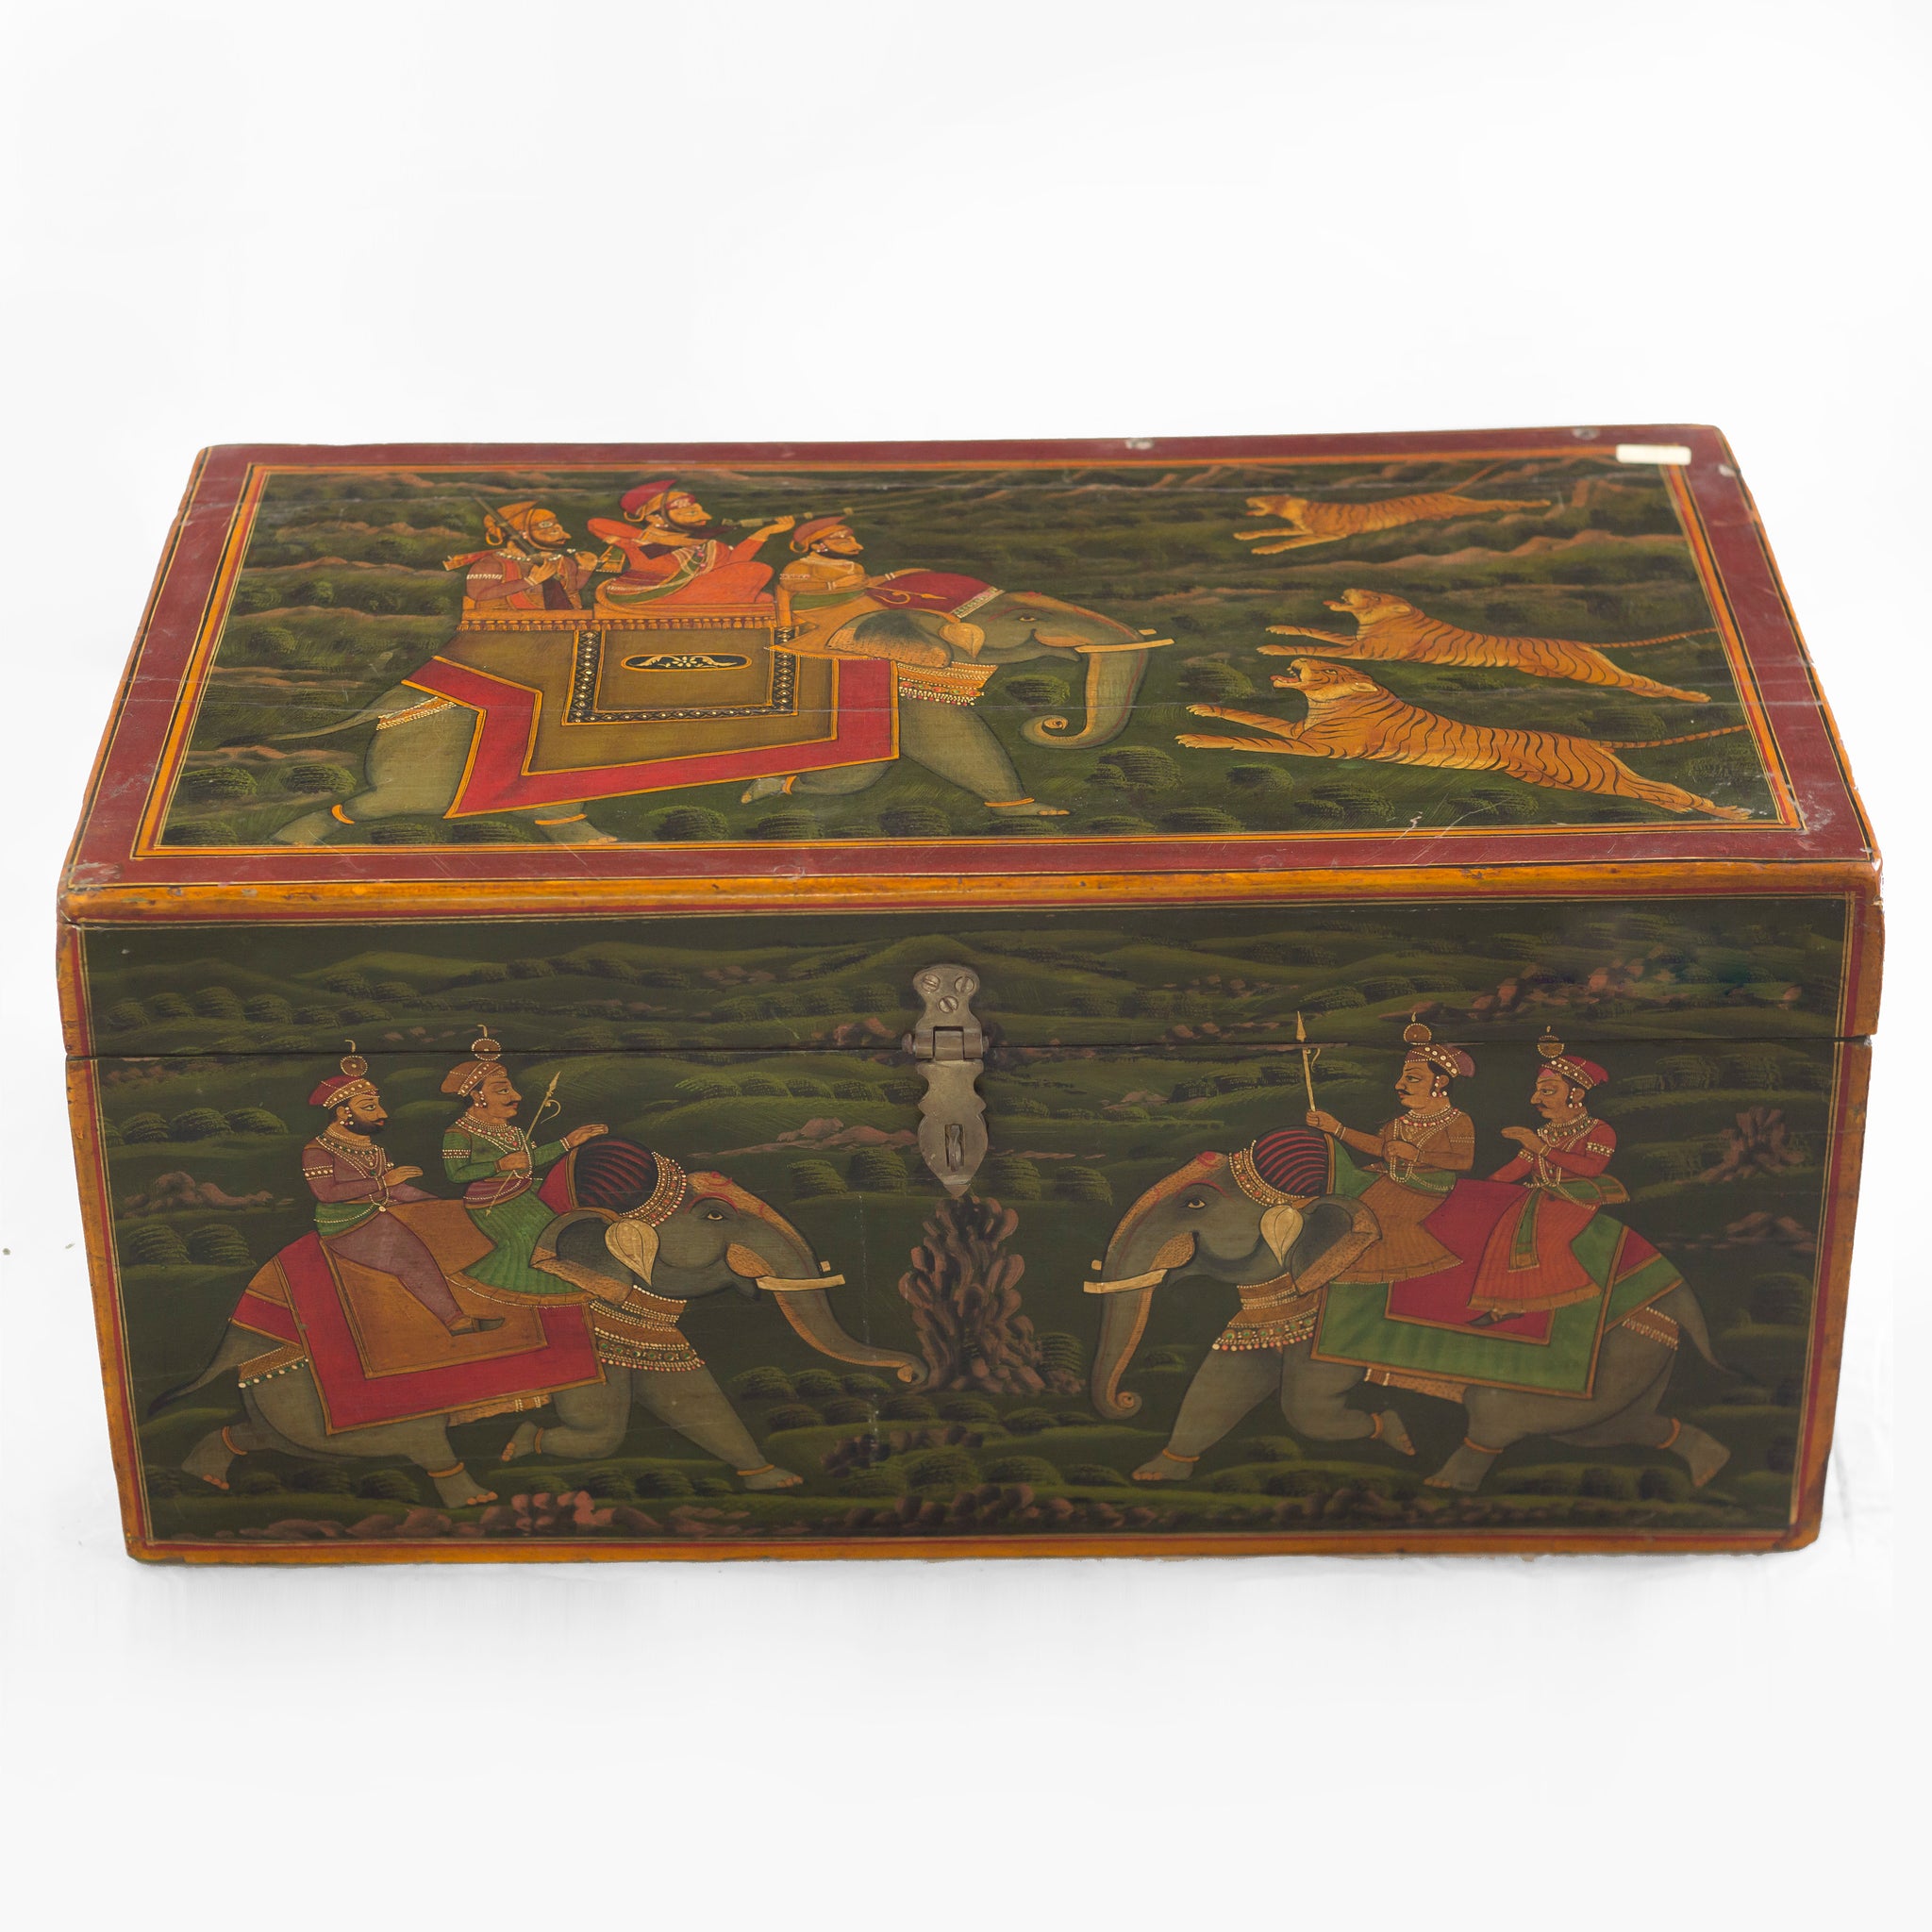 PAINTED WOODEN CHEST